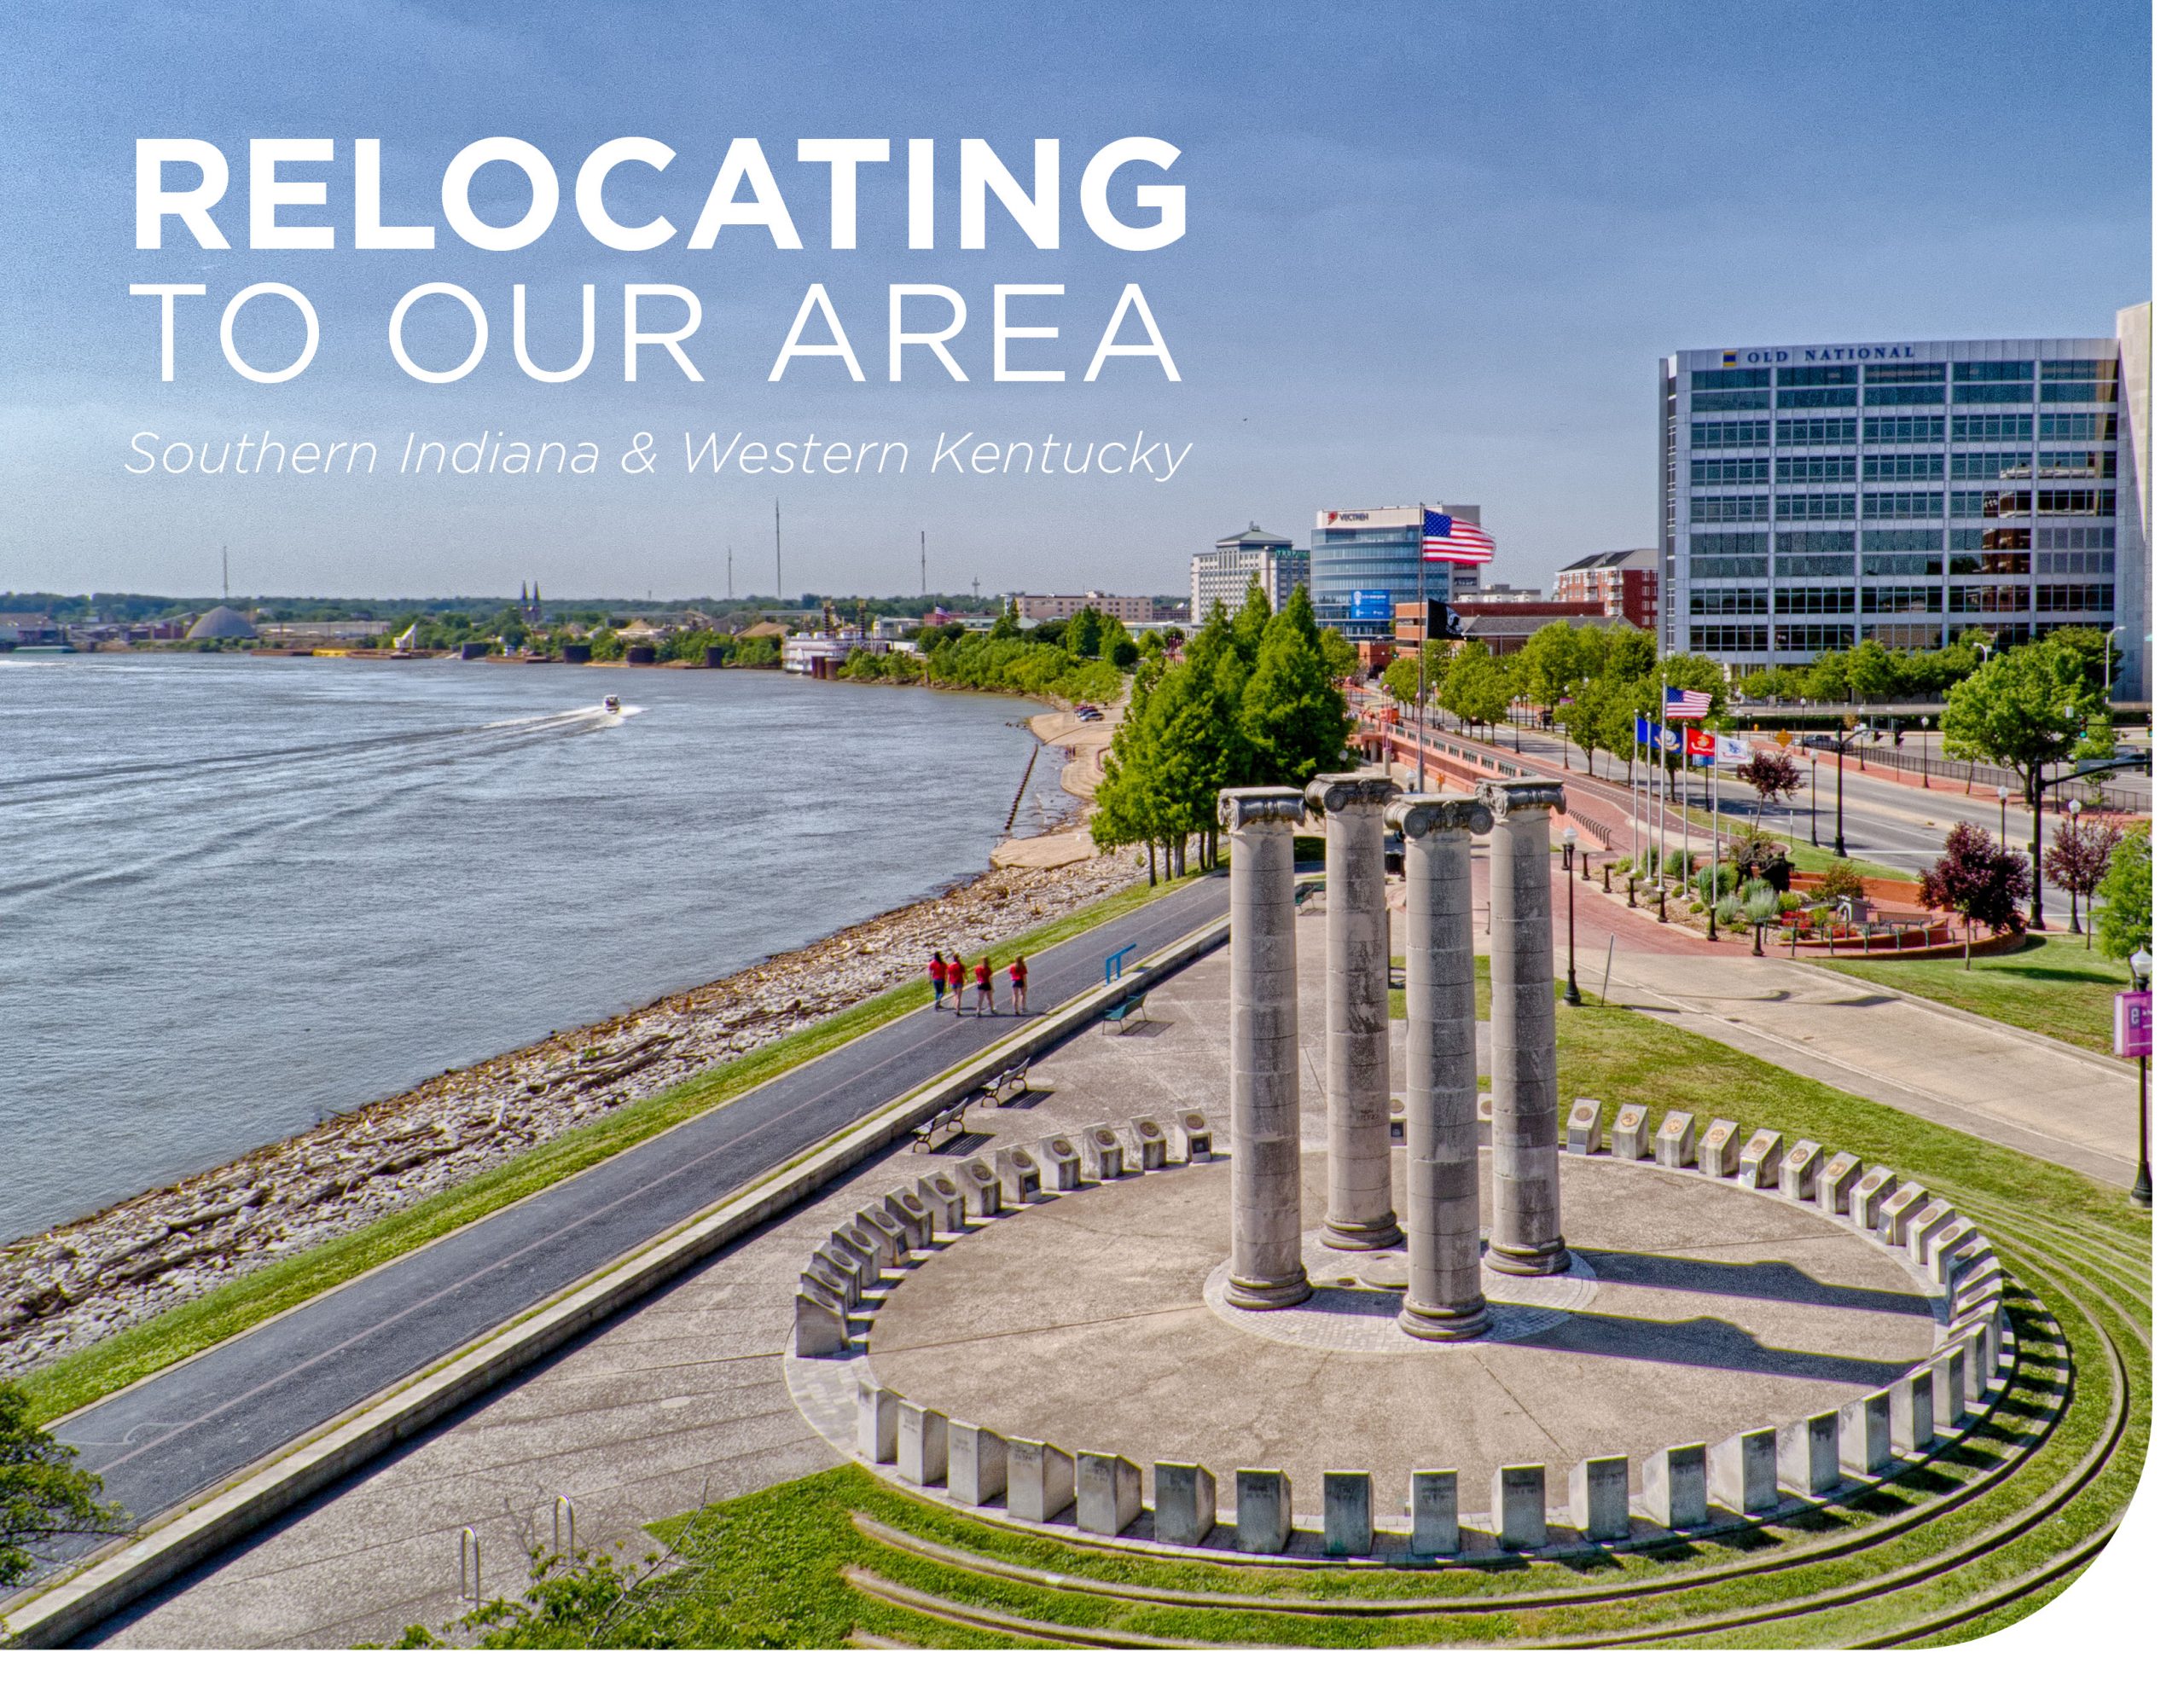 Relocating - downtown Evansville waterfront